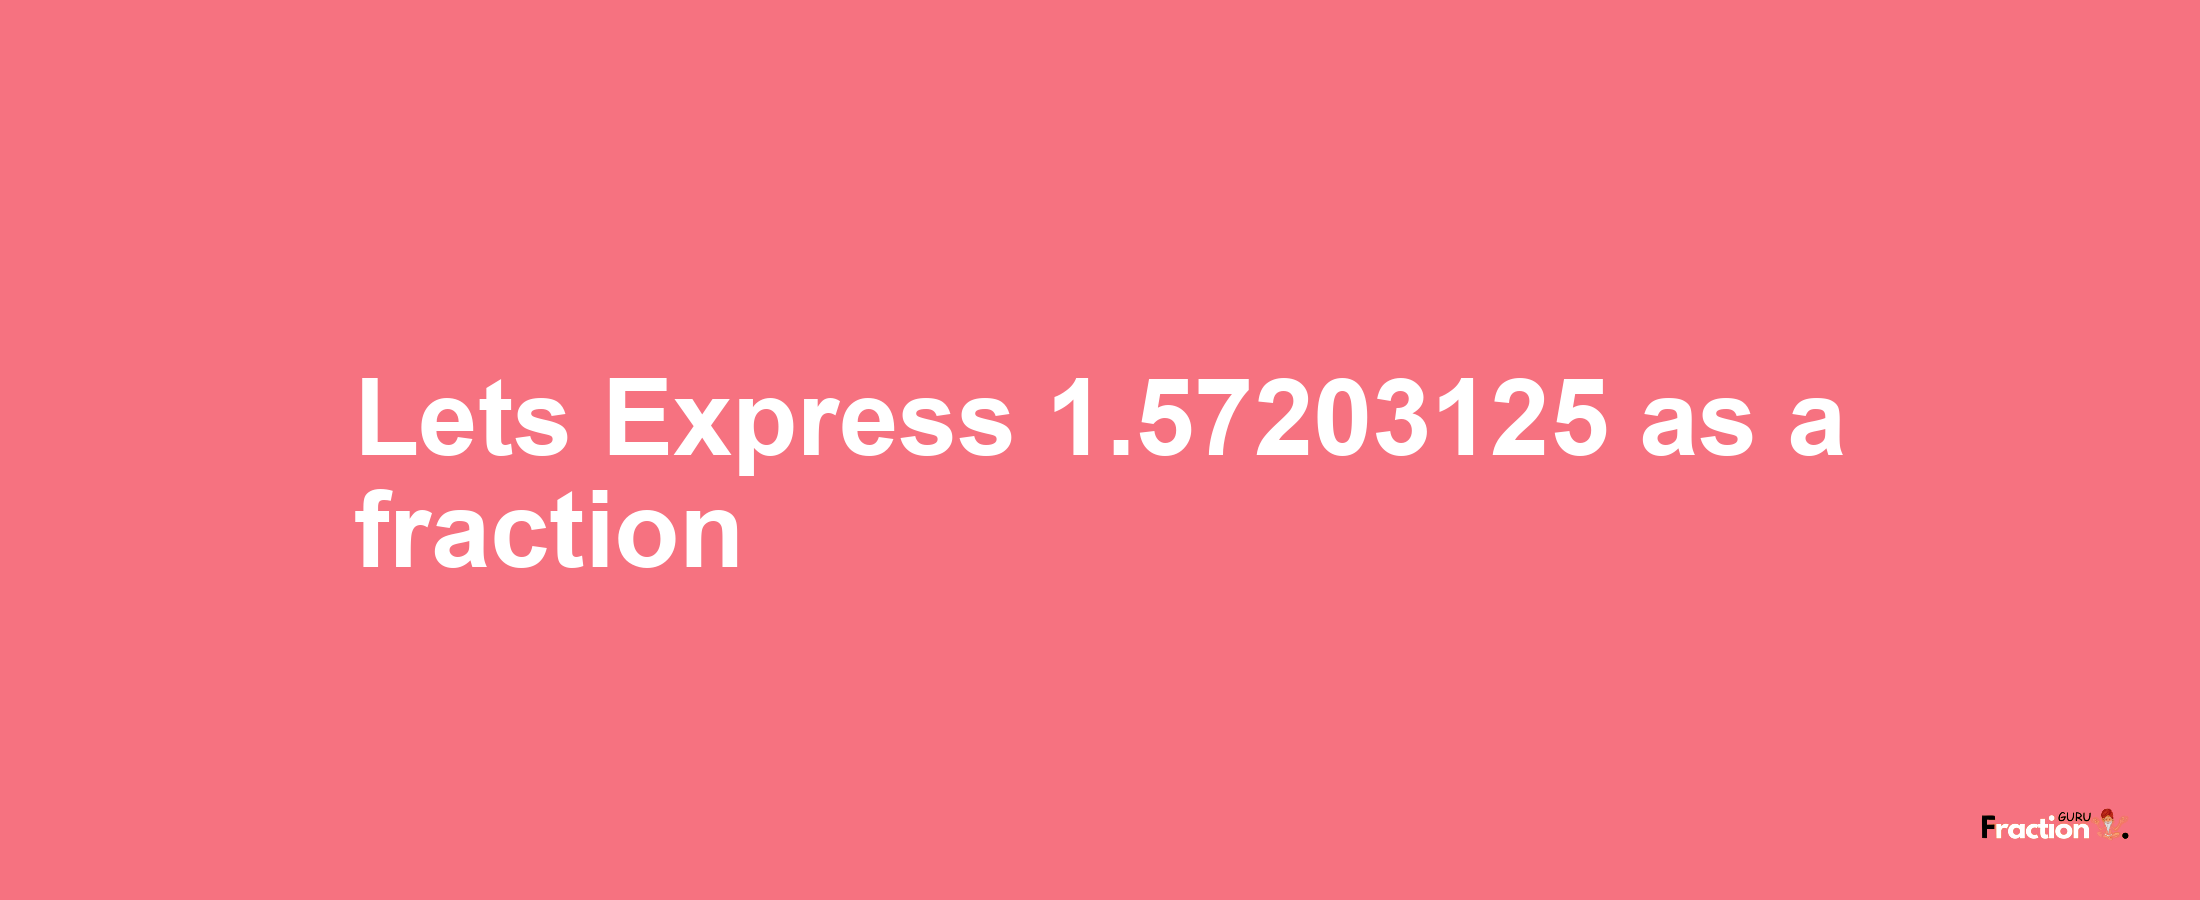 Lets Express 1.57203125 as afraction